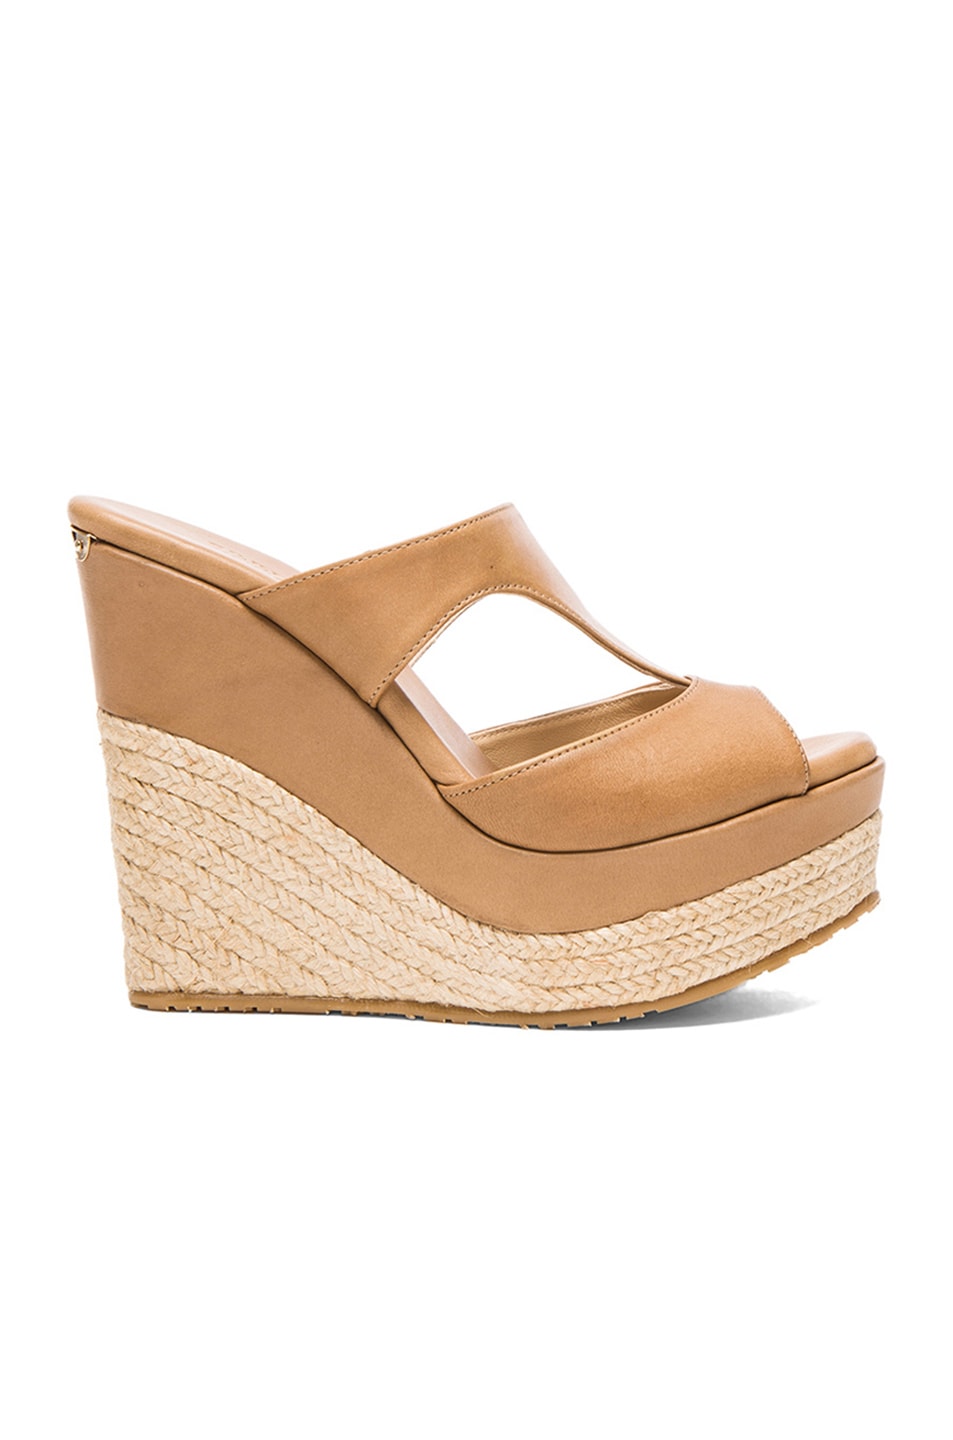 Image 1 of Jimmy Choo Pledge Leather Wedges in Tan